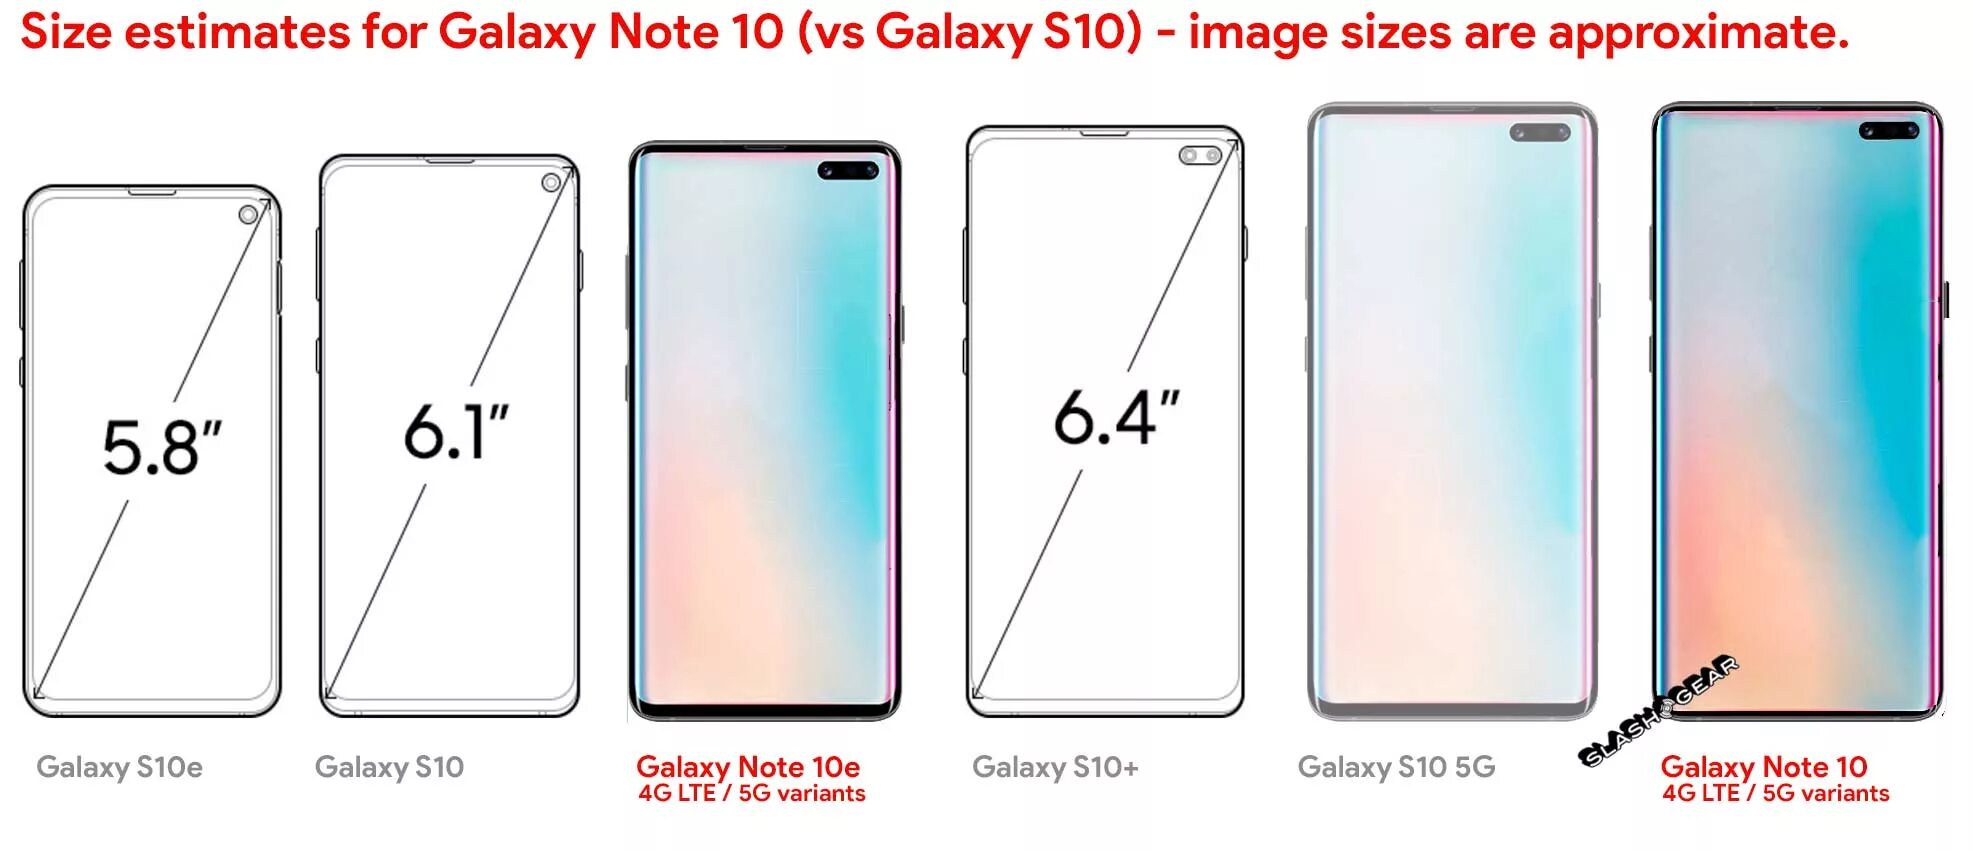 Note 13 s. Samsung Galaxy Note 10 размер дисплея. Galaxy Note 10 Plus габариты. Galaxy Note 10 Plus размер экрана. Самсунг галакси с 10 размер экрана.